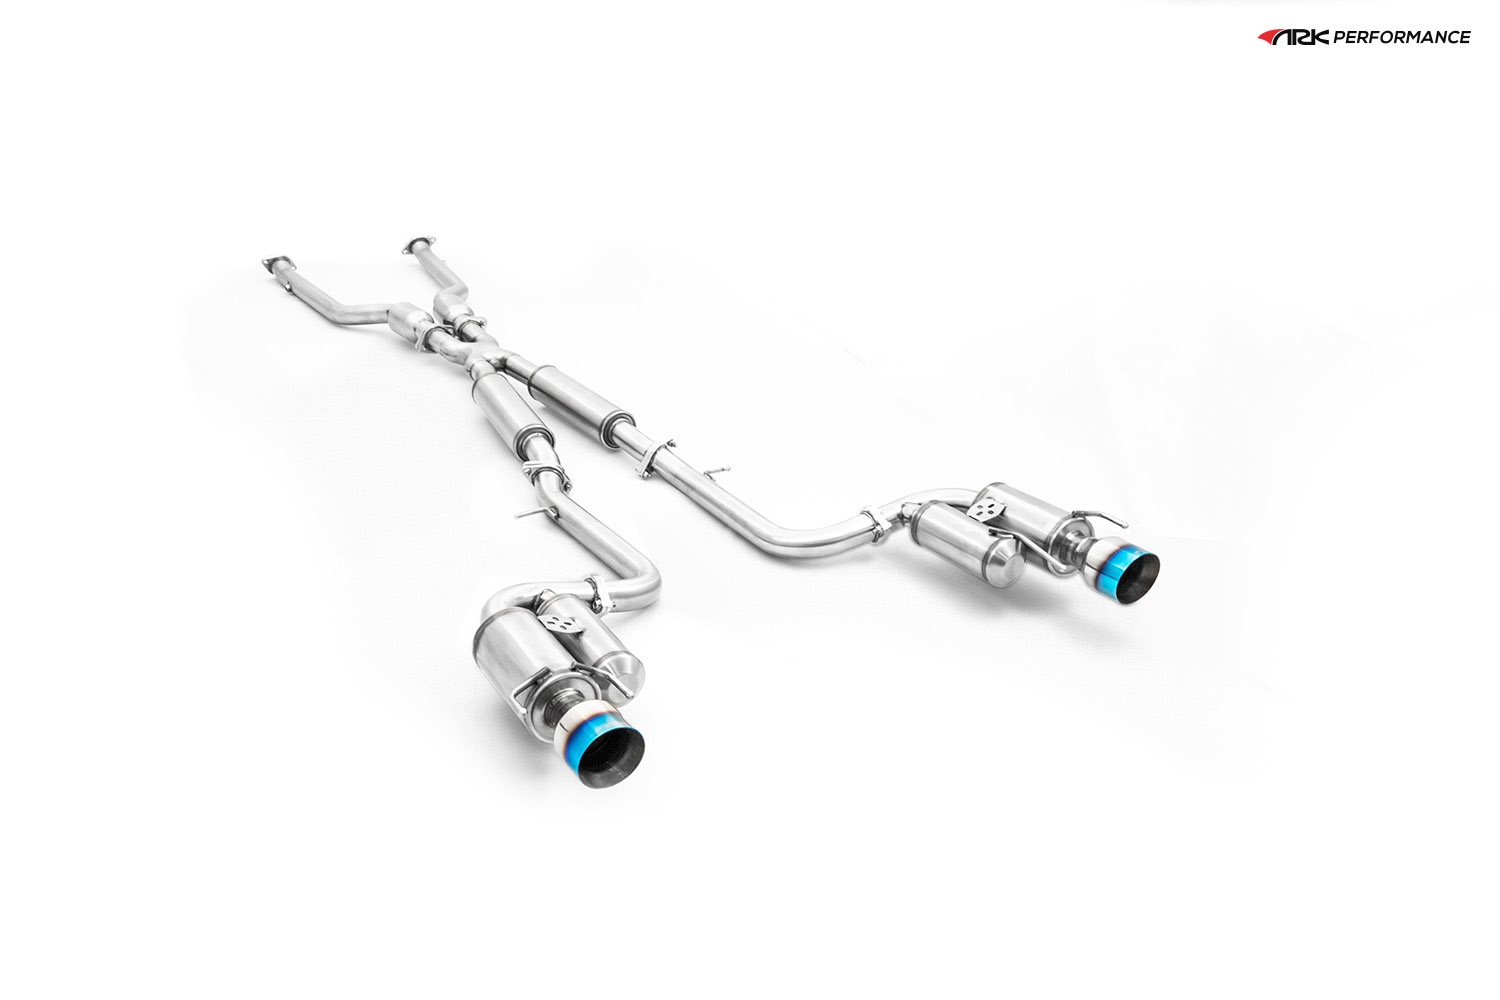 Ark Performance Stainless Steel GRiP Cat-Back Exhaust System 2.5in Pipe w/ 4.5 Burnt Single Tip, Dual Exit - Lexus IS 250 / 350 RWD 14-16 2.5L V6, 3.5L V6 GSE30 / GSE31